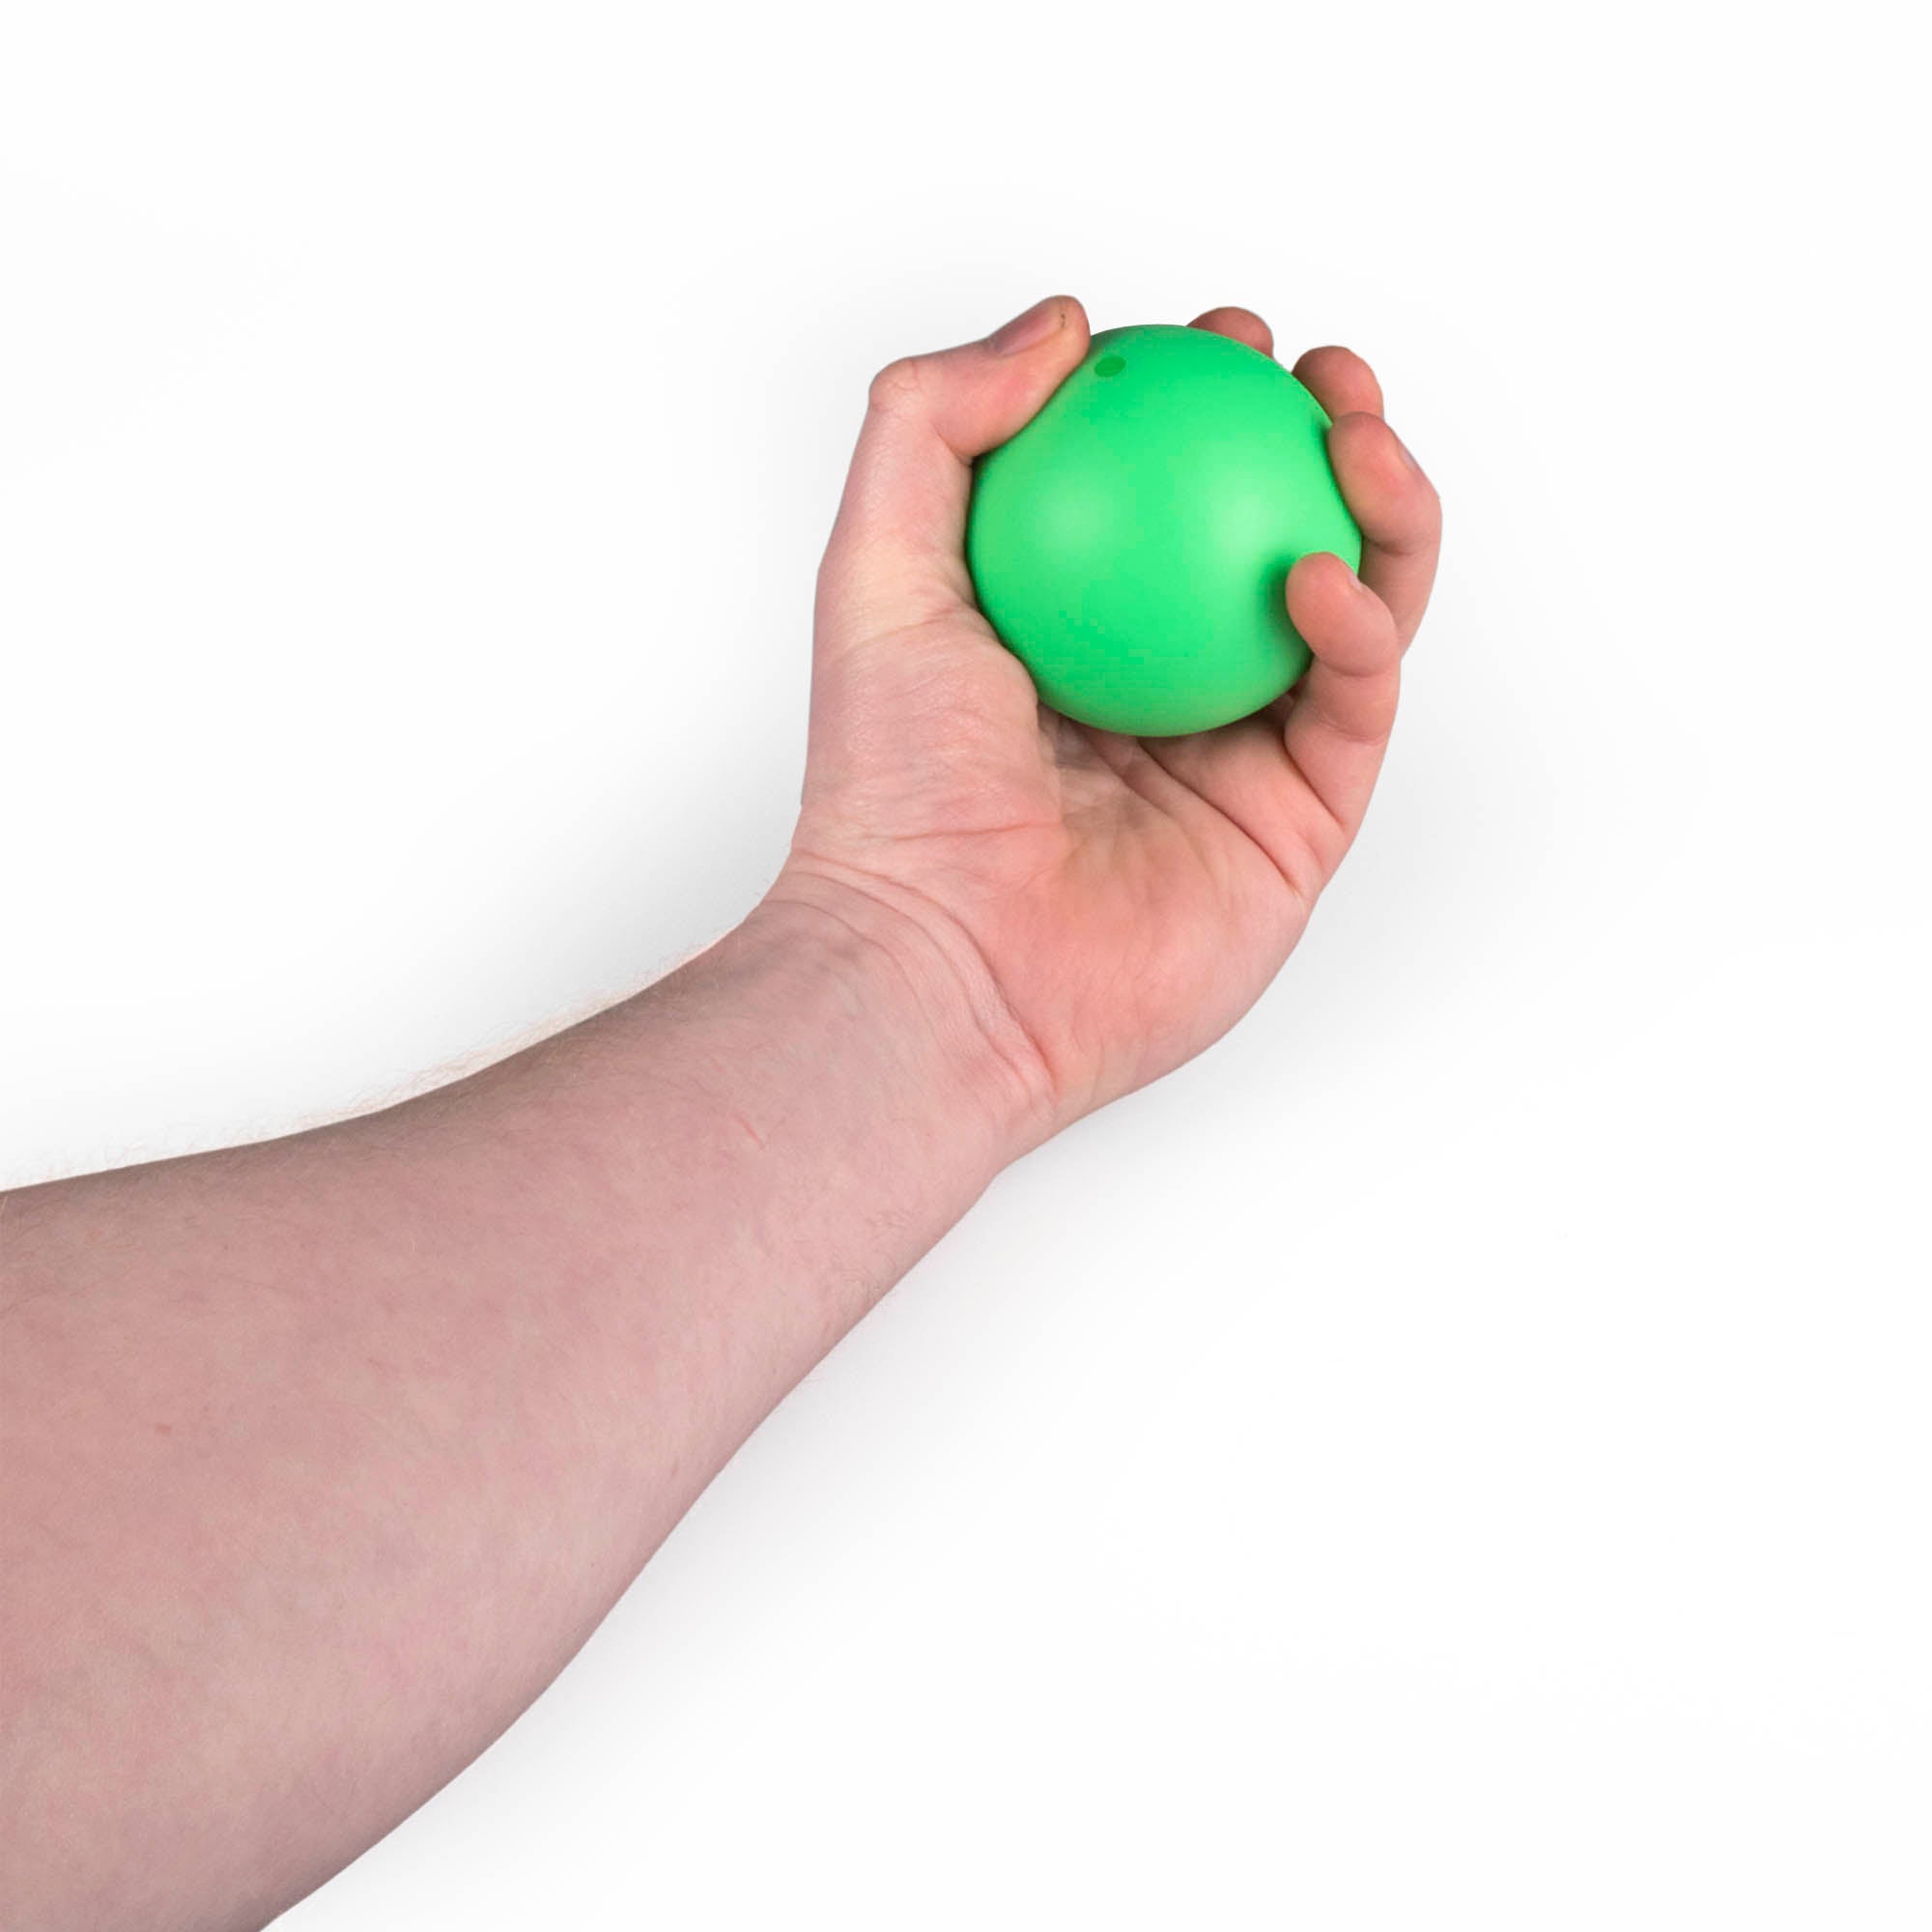 MMX 70mm green juggling ball in hand